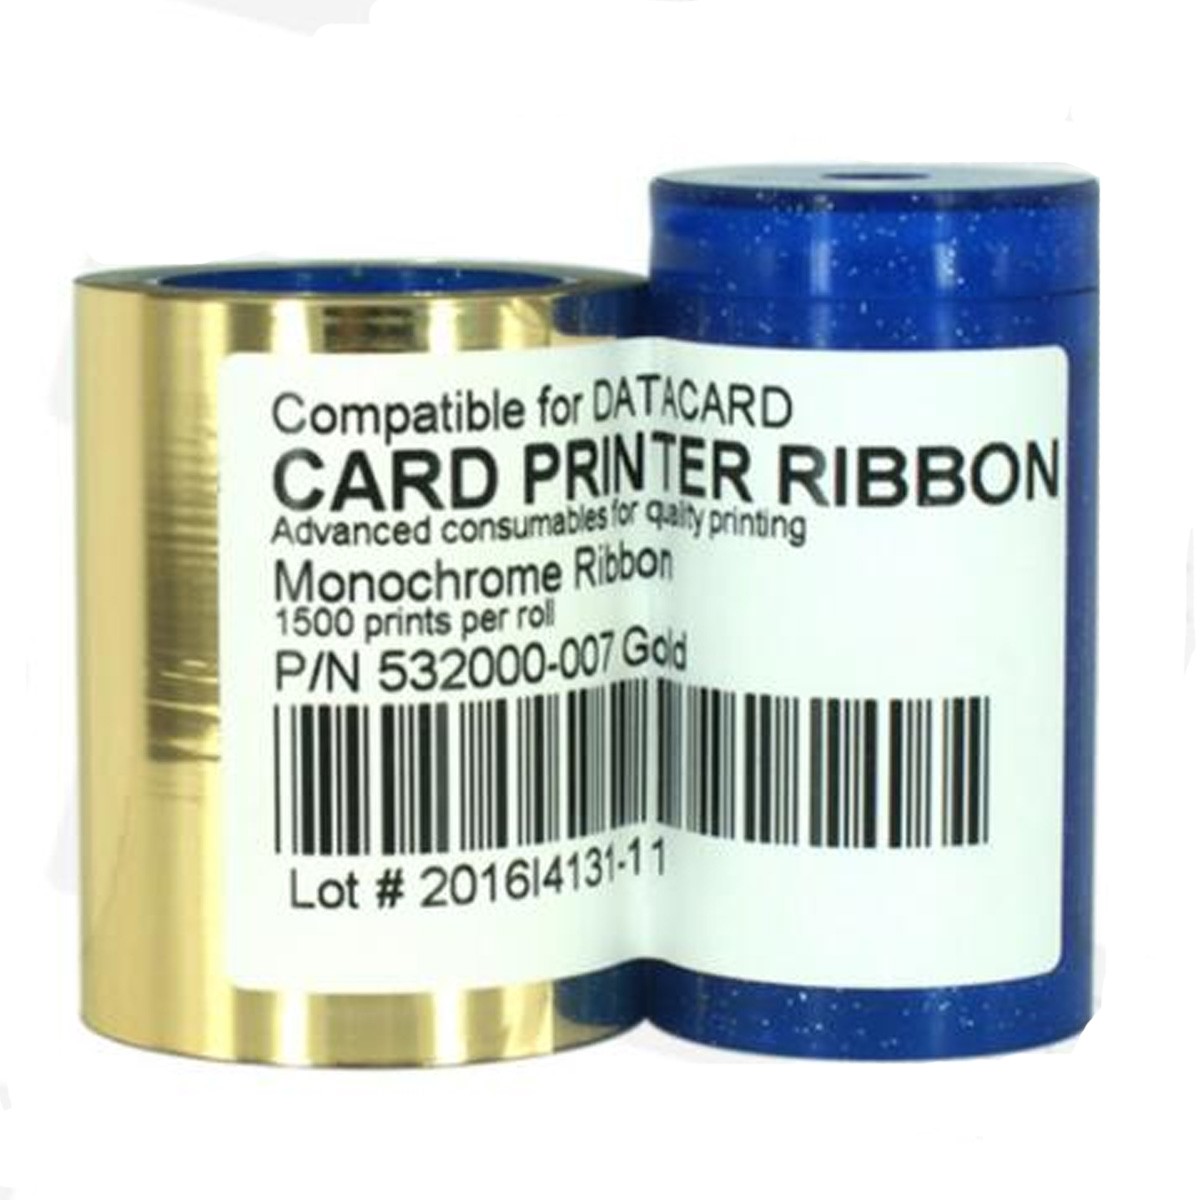 New compatible Ribbon for Datacard 532000-007 Gold 1500 sheet - Click Image to Close